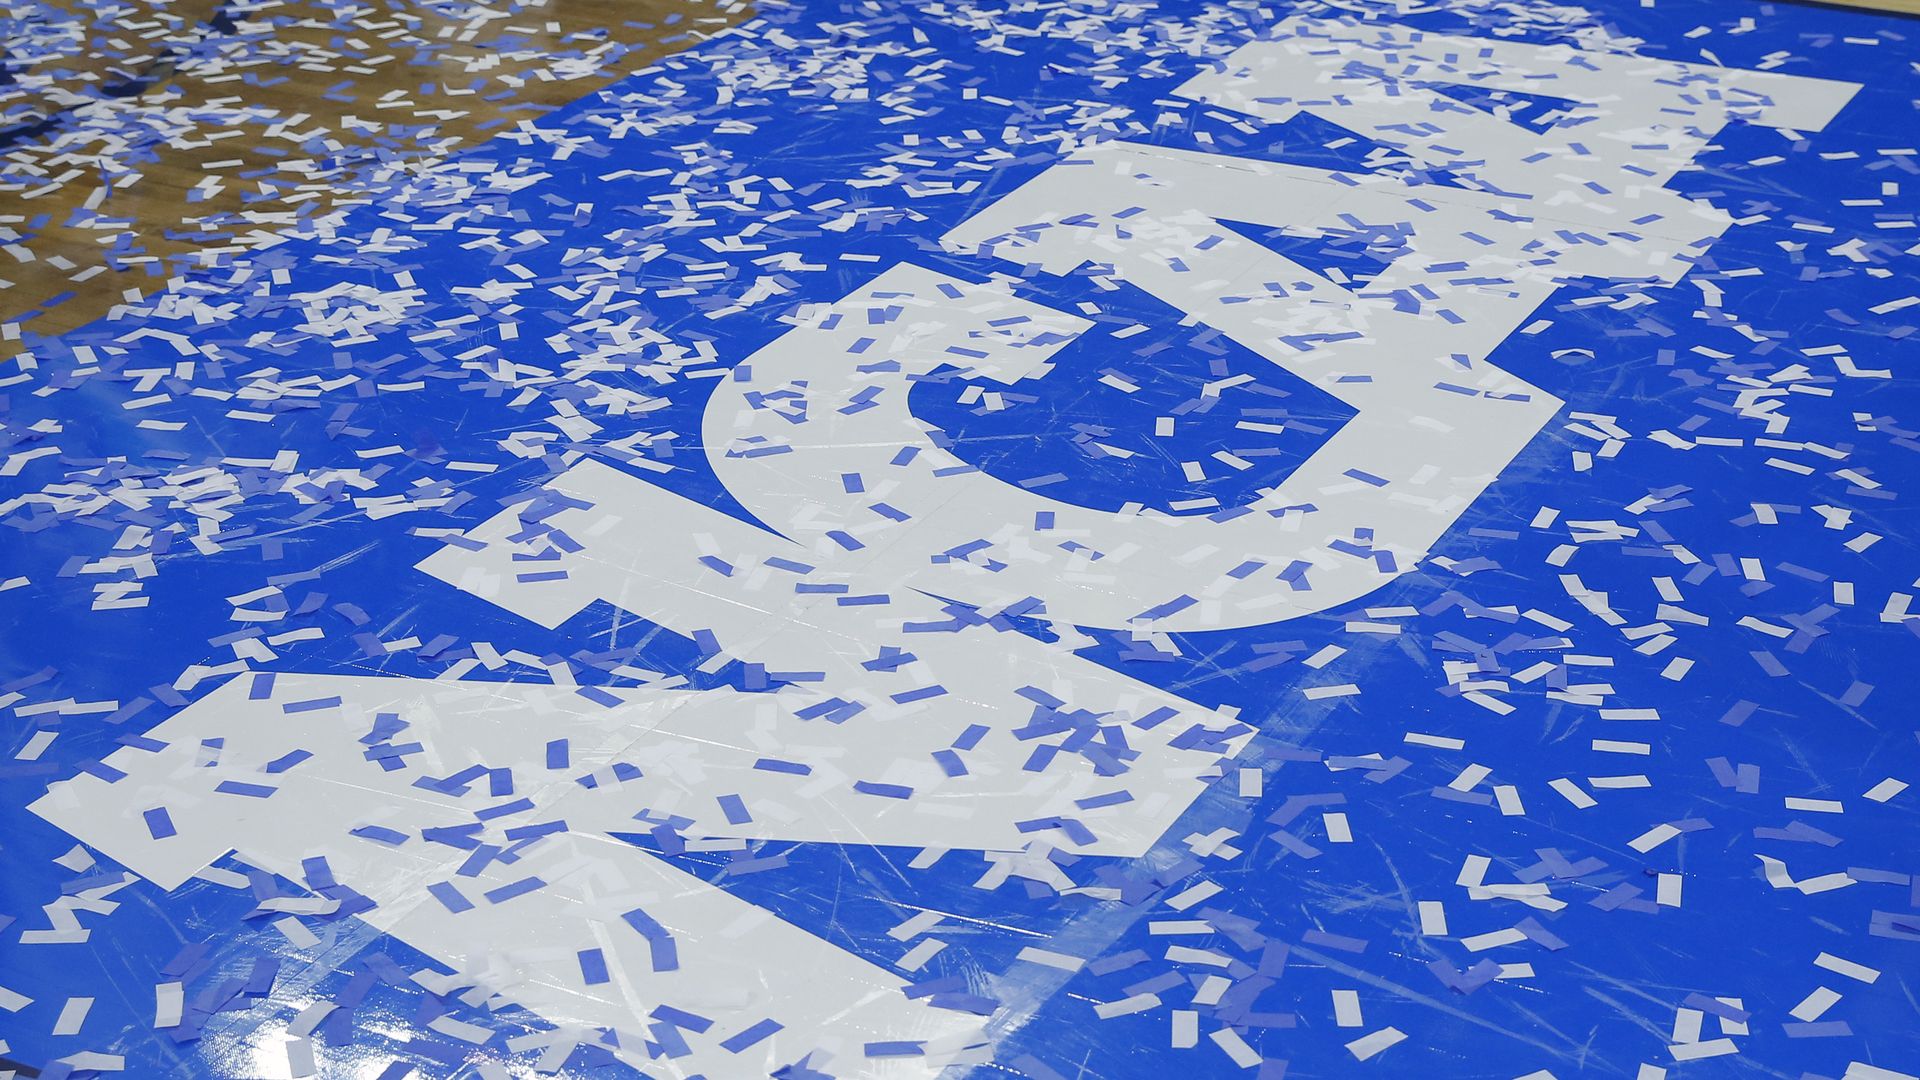 In this image, the blue and white block letter logo for NCAA is on the floor of a basketball court as confetti falls onto the floor.